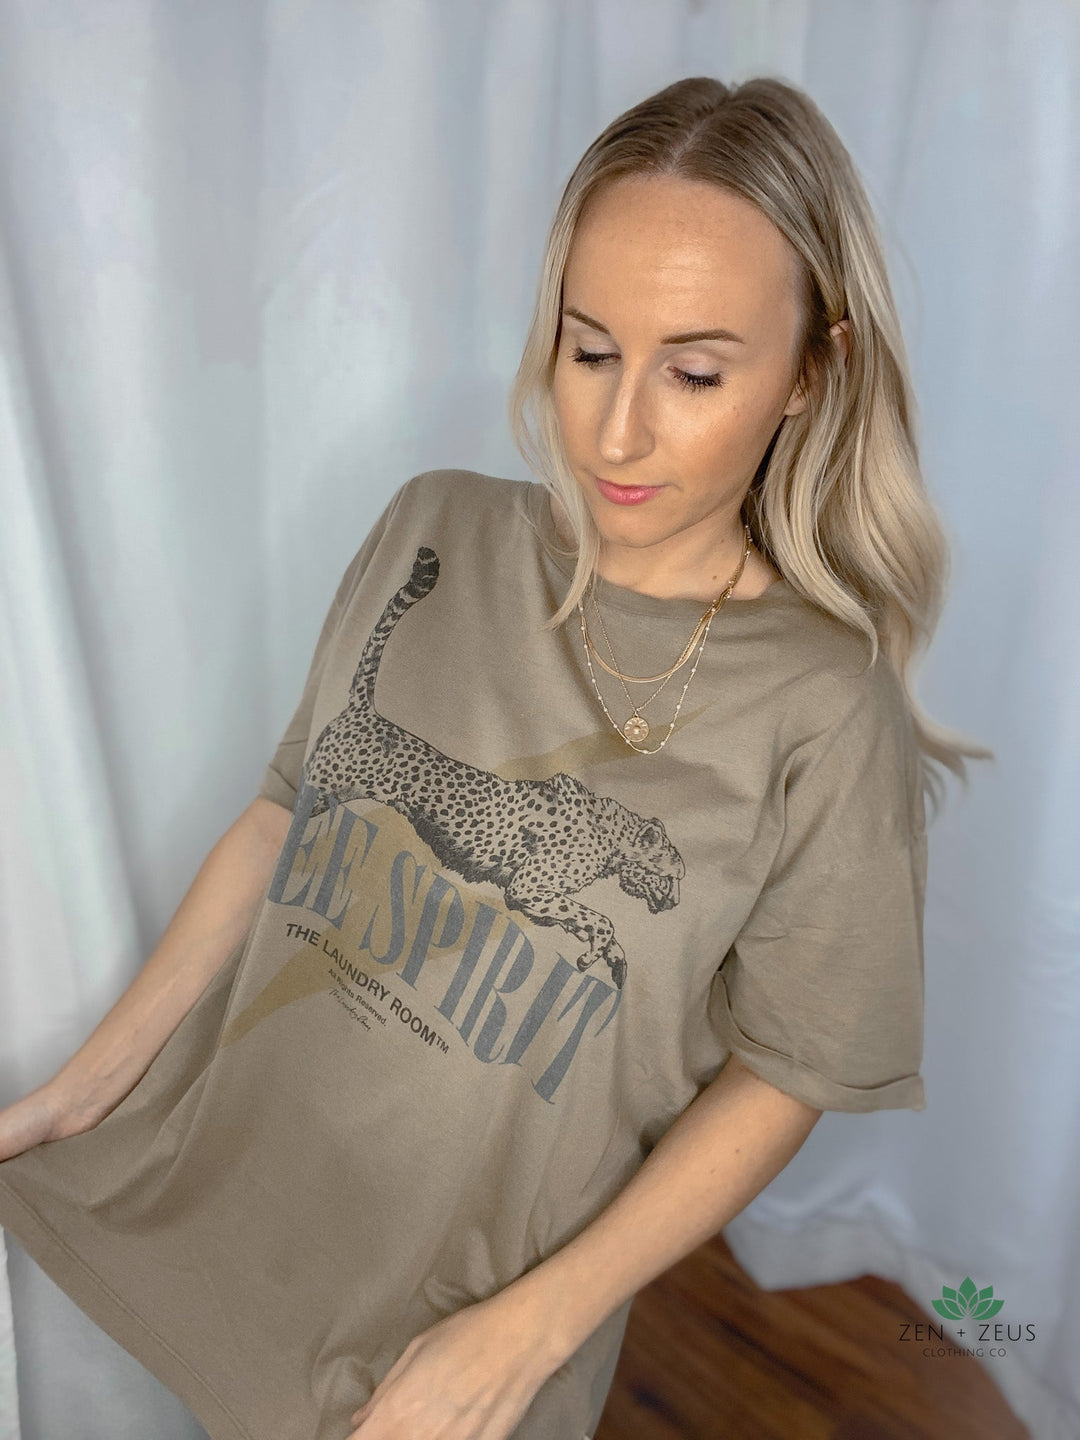 The Laundry Room Free Spirit Oversized Tee - Camel Gold - Graphic Tee